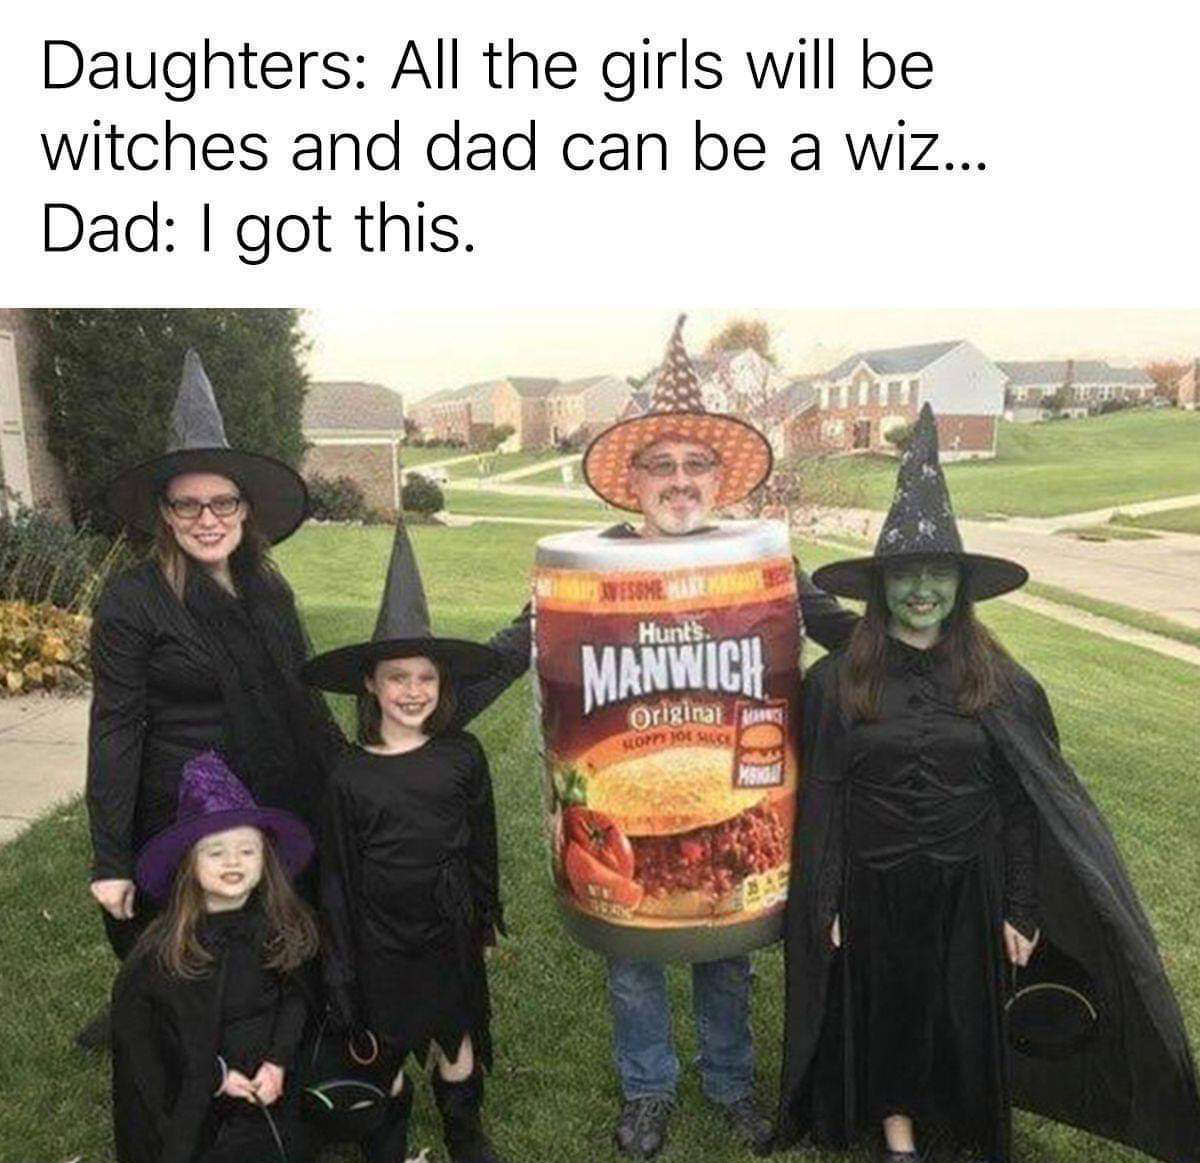 witches and manwich costume - Daughters All the girls will be witches and dad can be a wiz... Dad I got this. Esse Hunt's Manwich original funesi corno Sice